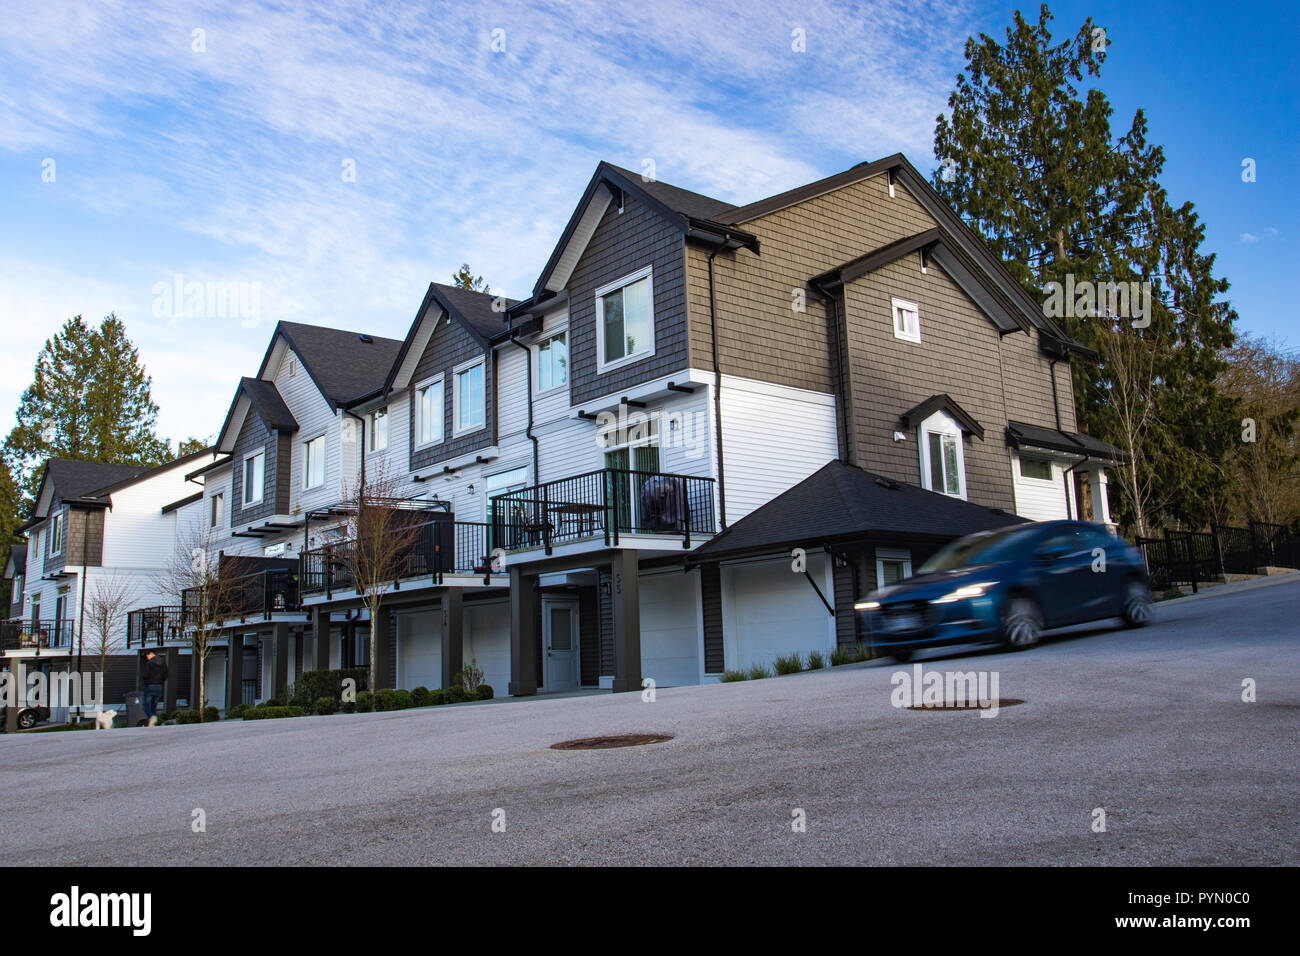 Great and comfortable neighborhood. A row of townhouses at the empty street. Stock Photo